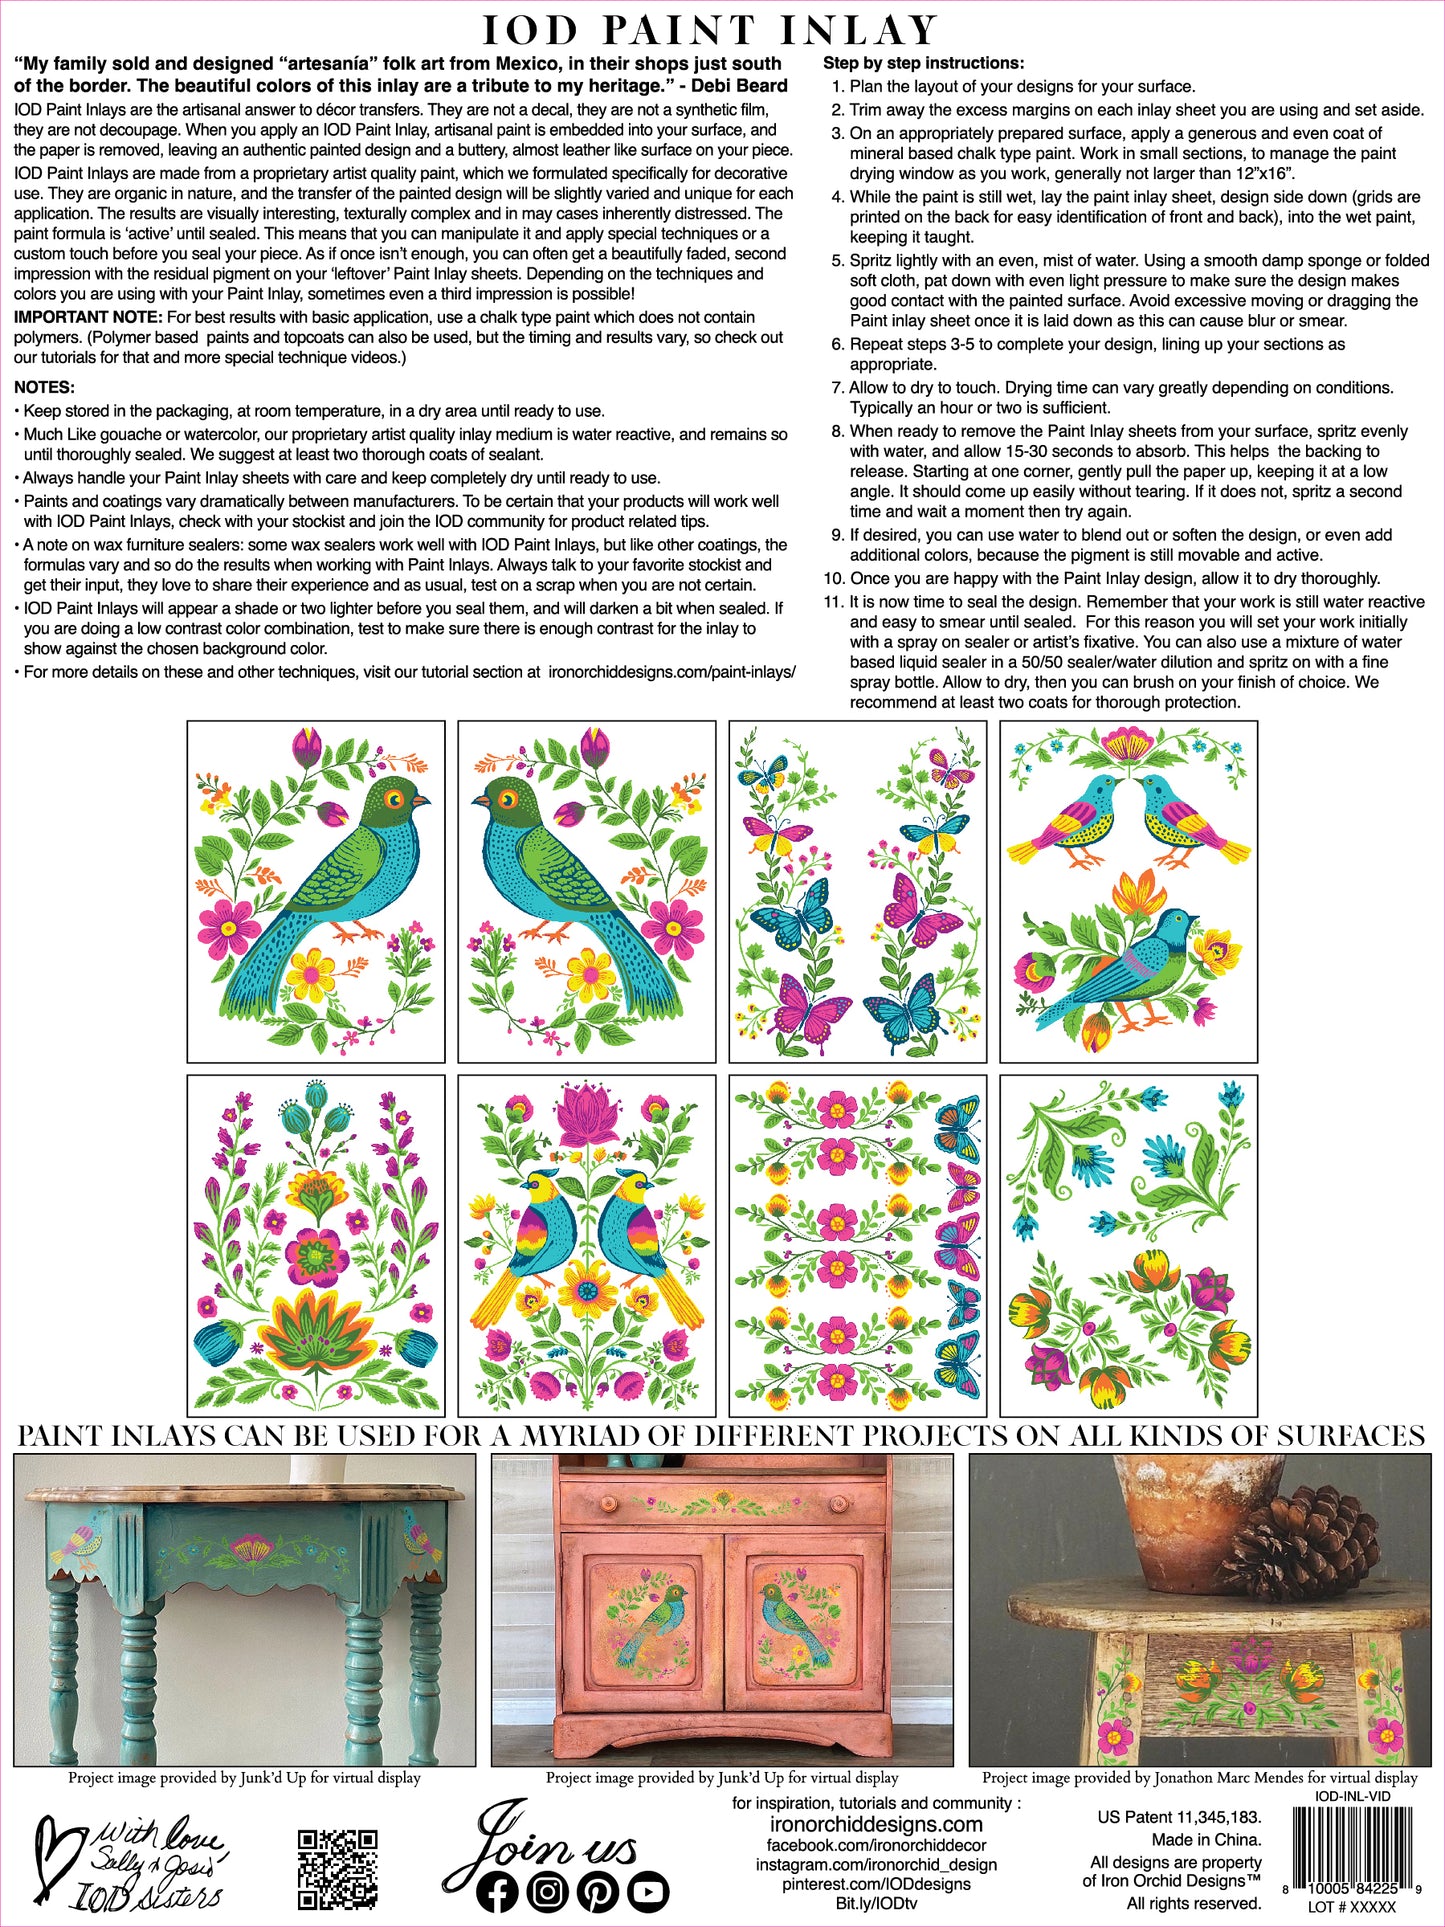 Vida Flora Paint Inlay- by IOD and Debi Beard LIMITED RELEASE!